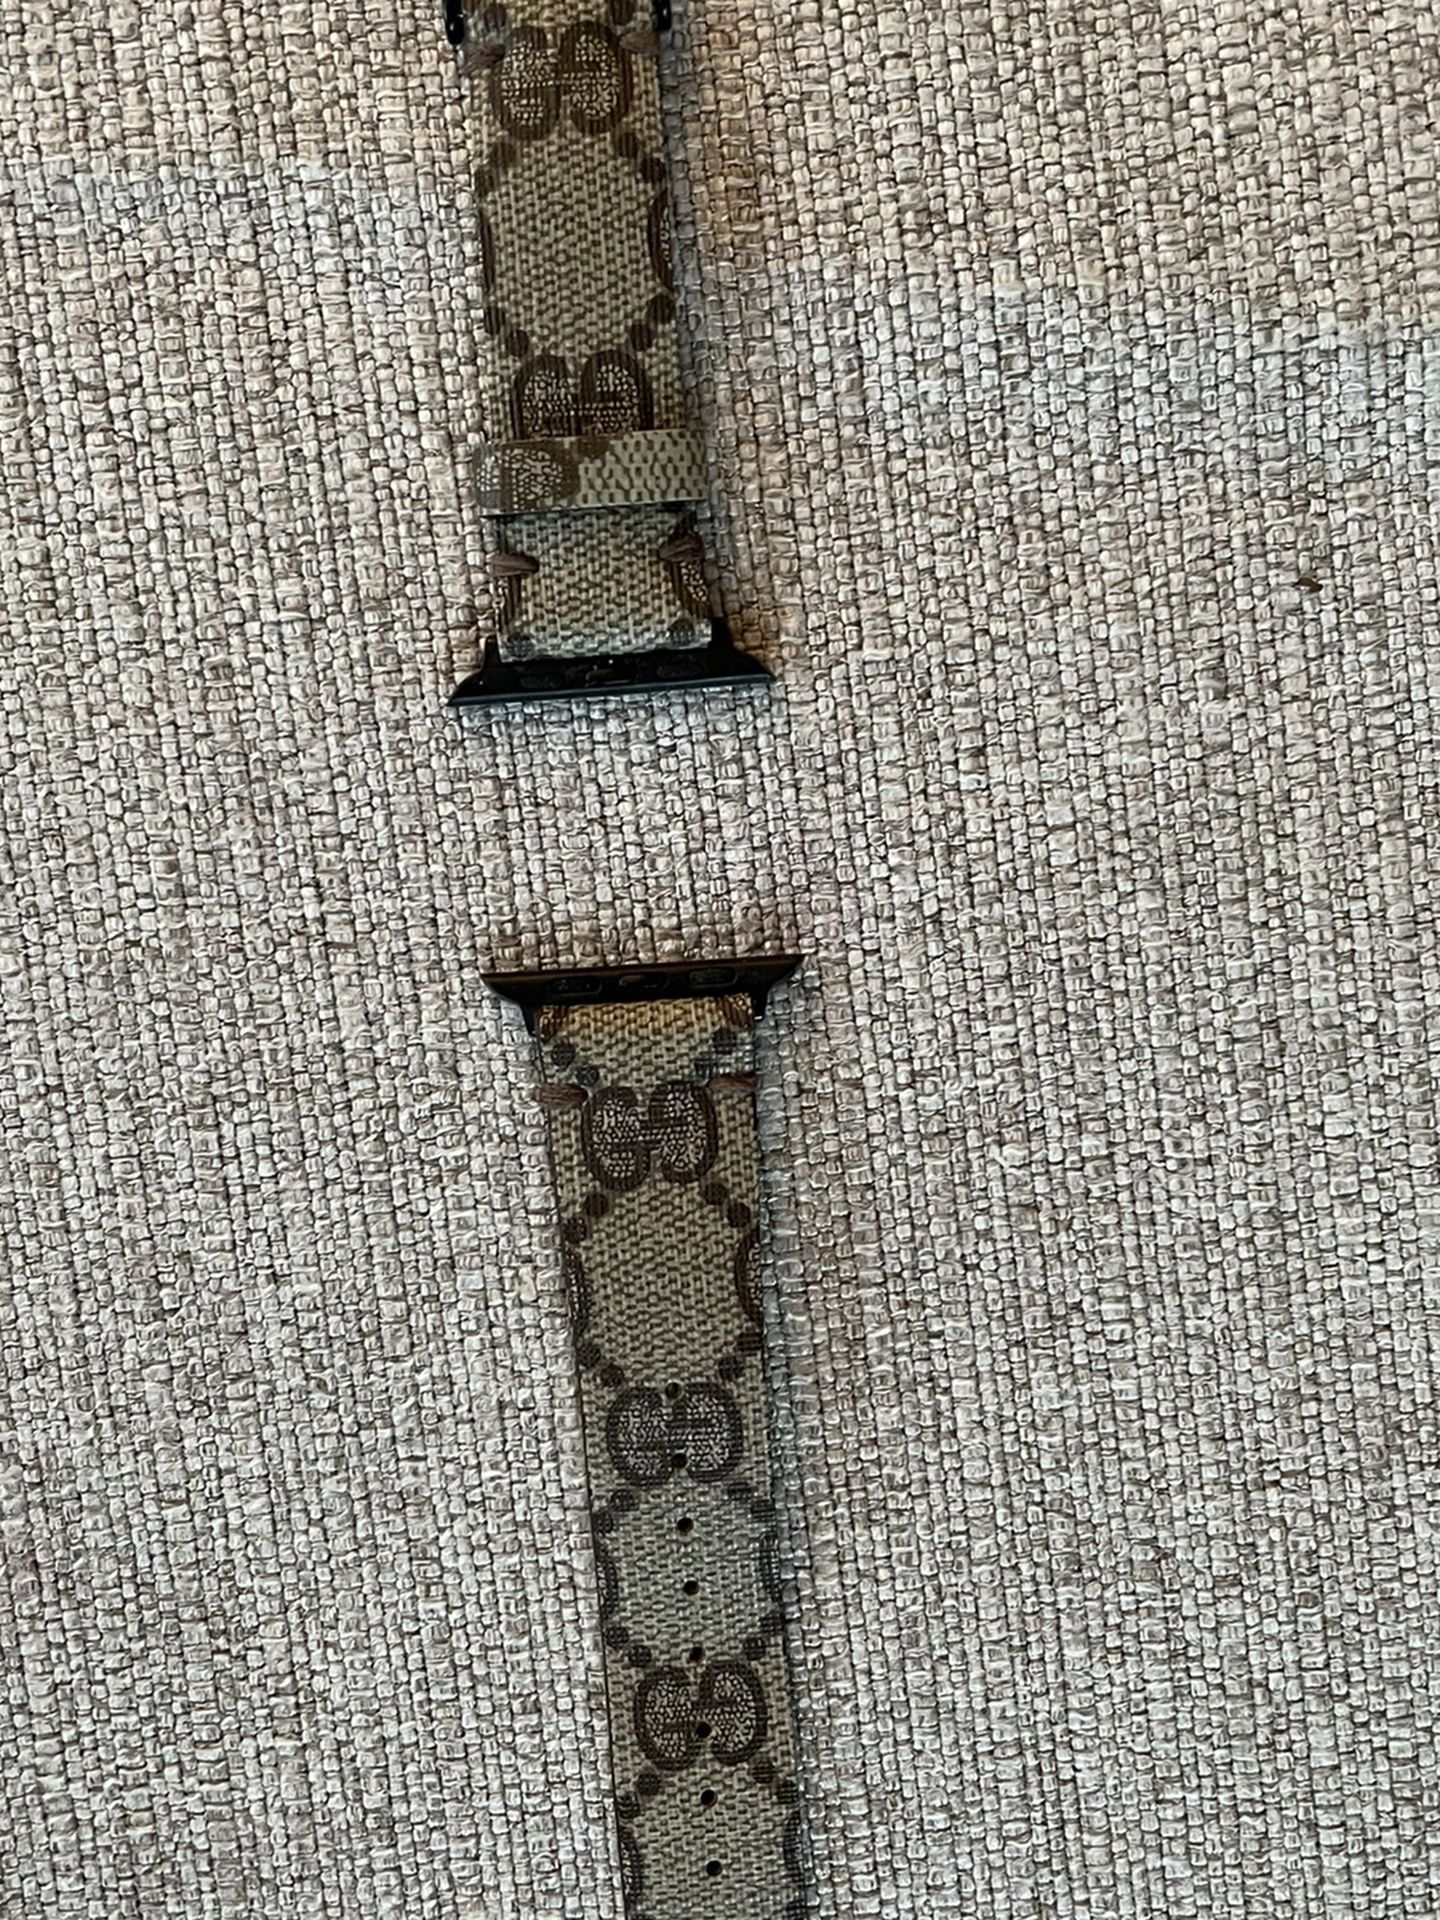 Gucci - Apple Watch Band - Cut From A Real Gucci Bag.